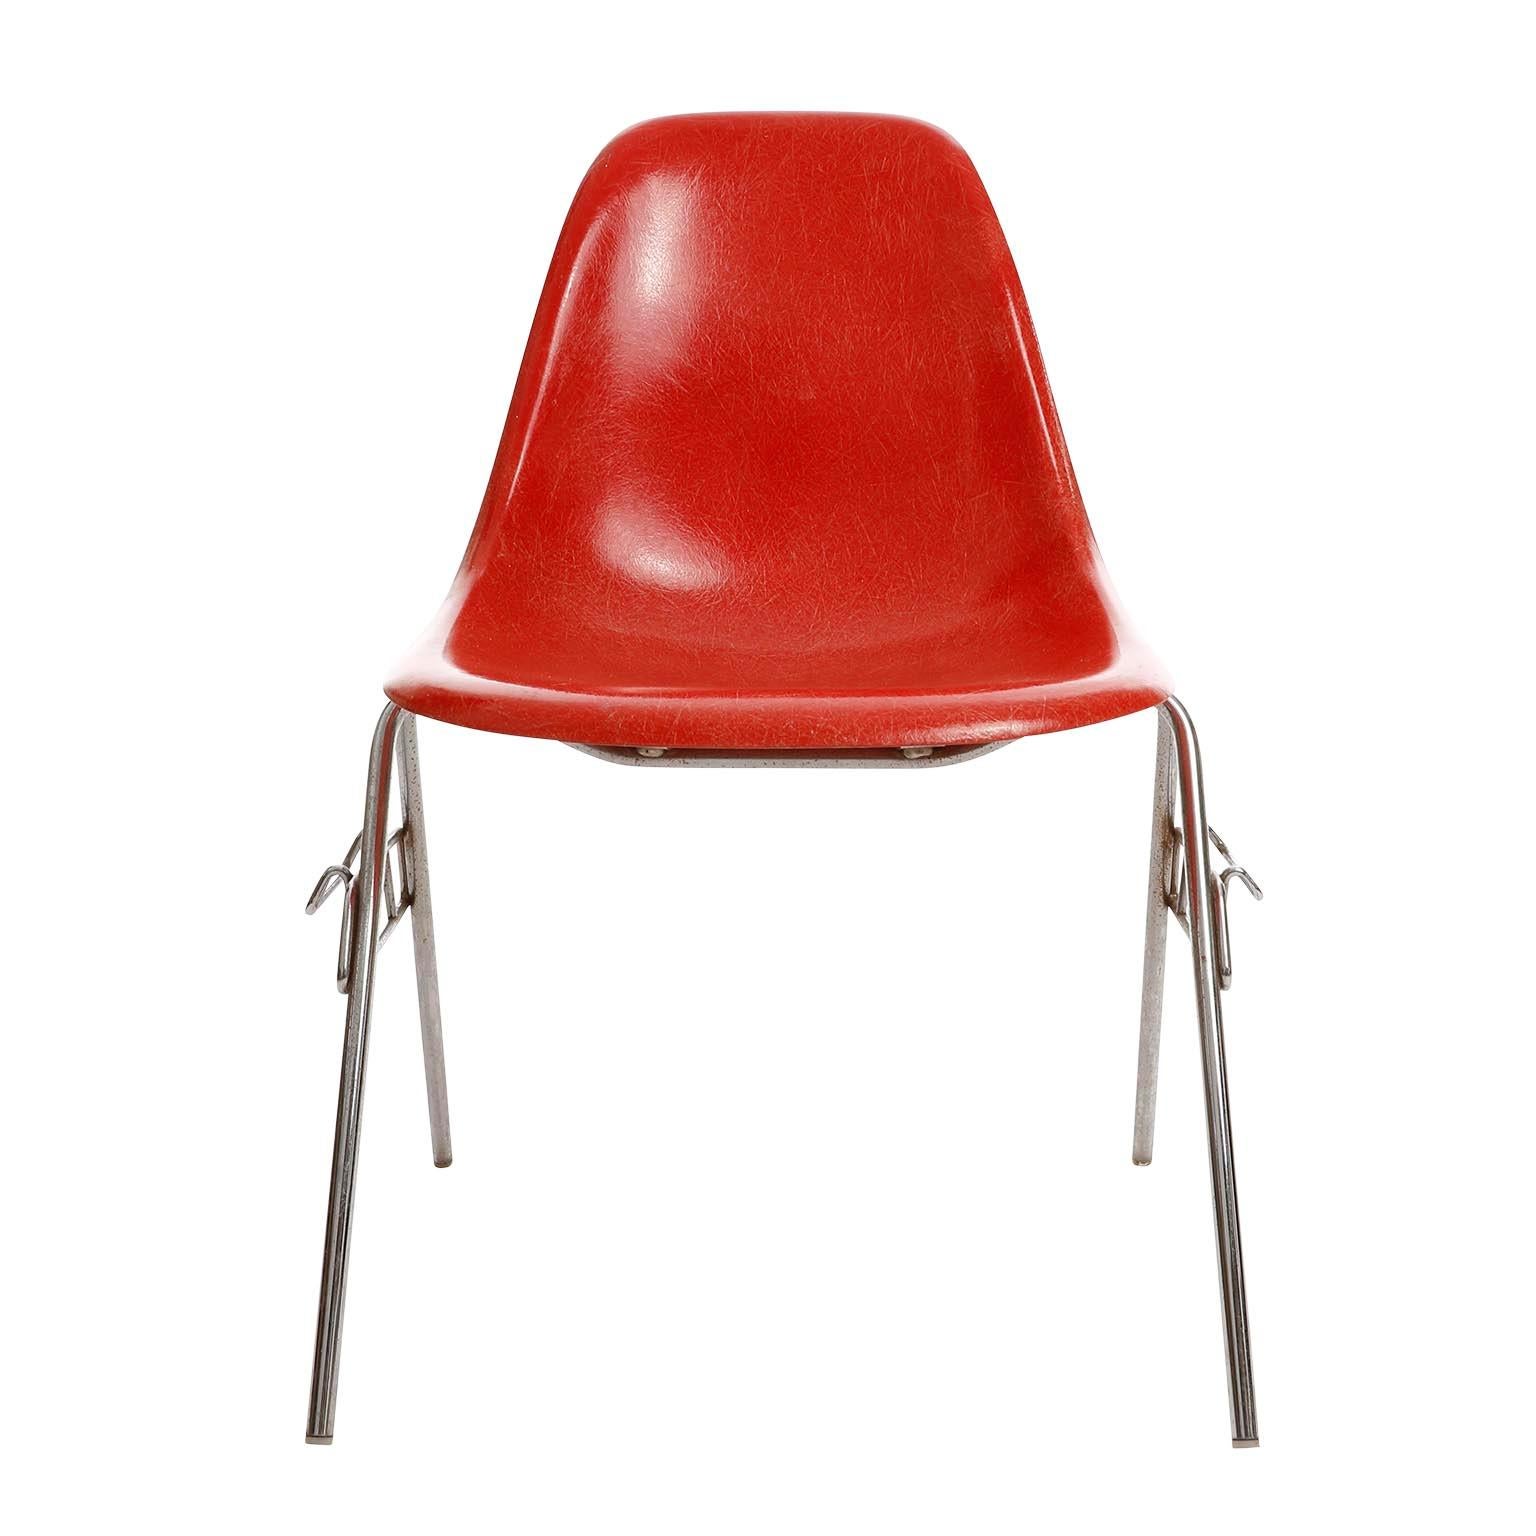 Mid-Century Modern Six Stacking Chairs, Charles & Ray Eames, Herman Miller, Red Fiberglass, 1974. For Sale